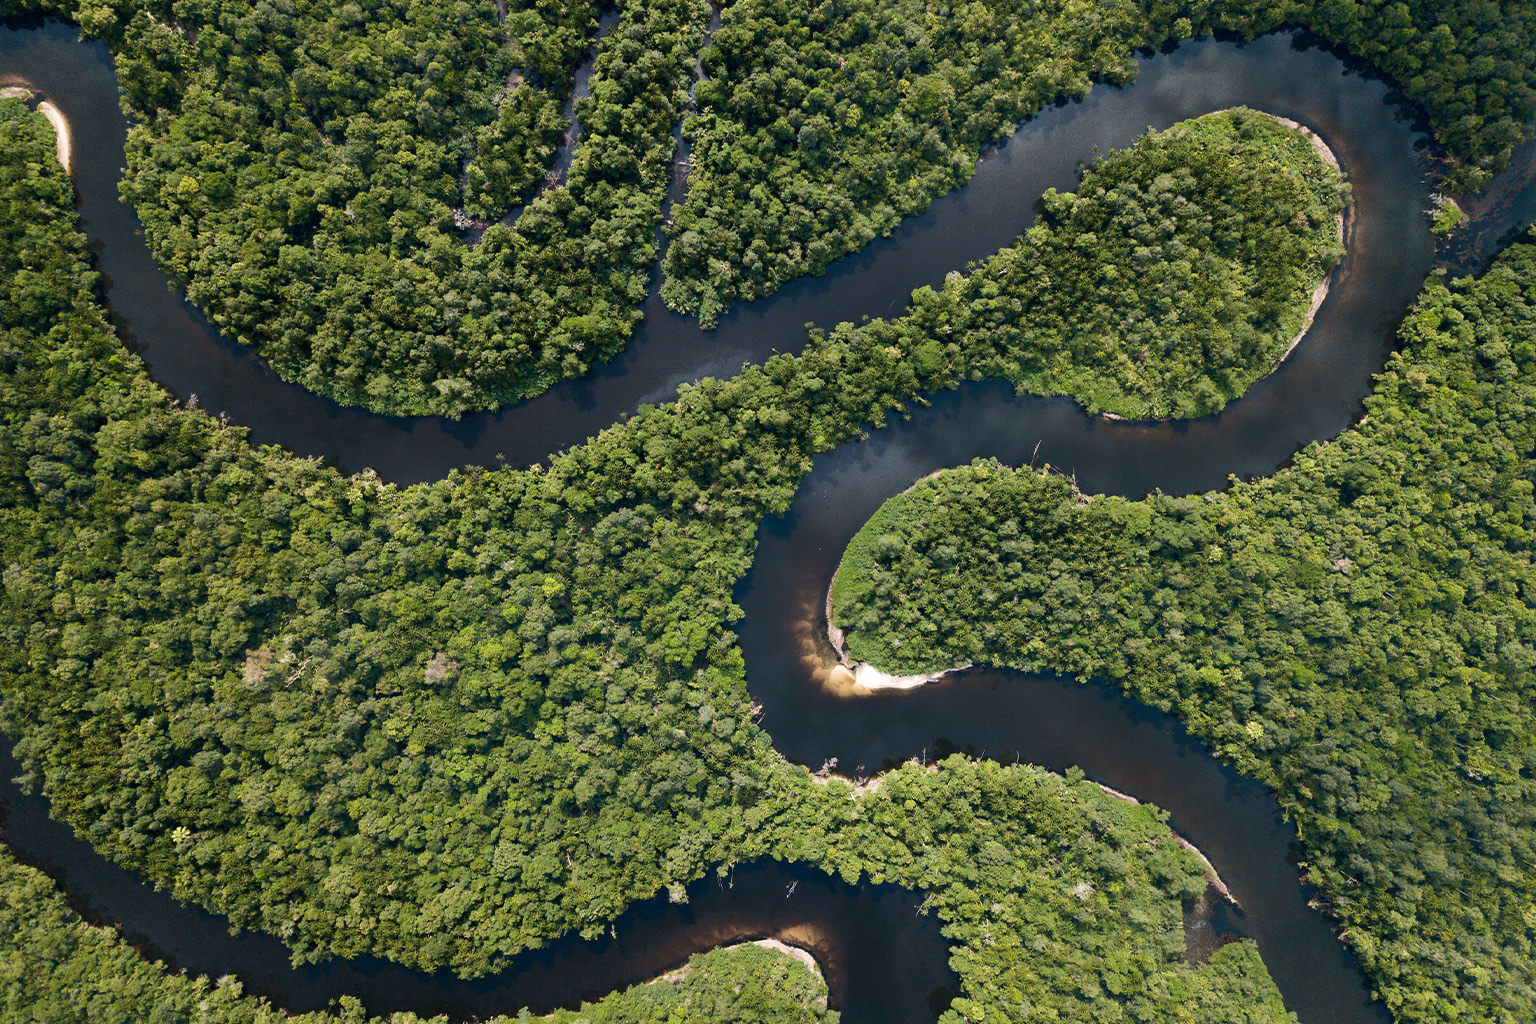 An aerial view of the Cardamom Mountains in Cambodia